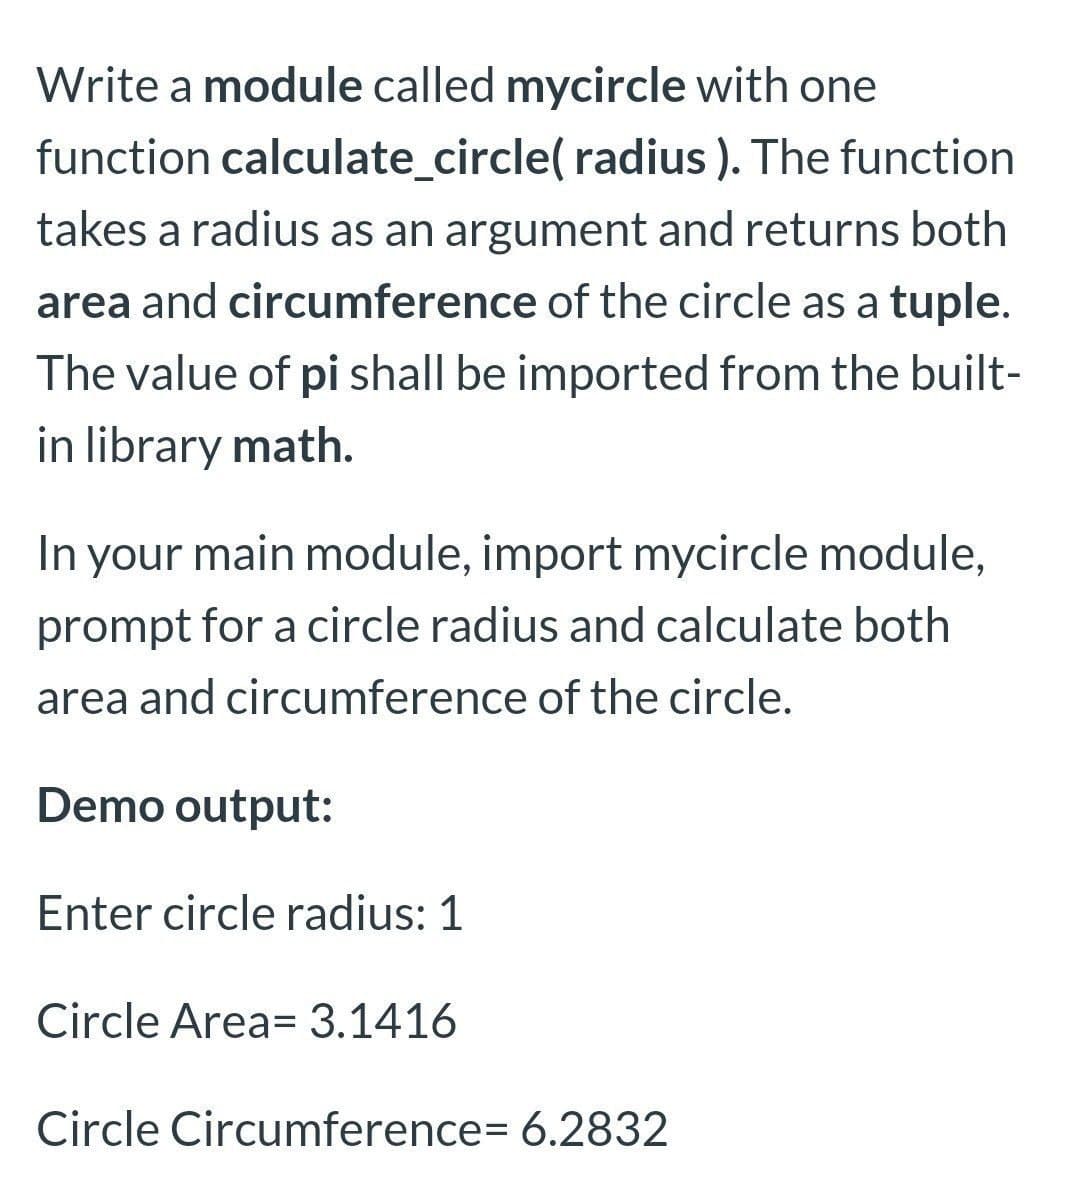 Write a module called mycircle with one
function calculate_circle( radius ). The function
takes a radius as an argument and returns both
area and circumference of the circle as a tuple.
The value of pi shall be imported from the built-
in library math.
In your main module, import mycircle module,
prompt for a circle radius and calculate both
area and circumference of the circle.
Demo output:
Enter circle radius: 1
Circle Area= 3.1416
Circle Circumference= 6.2832
